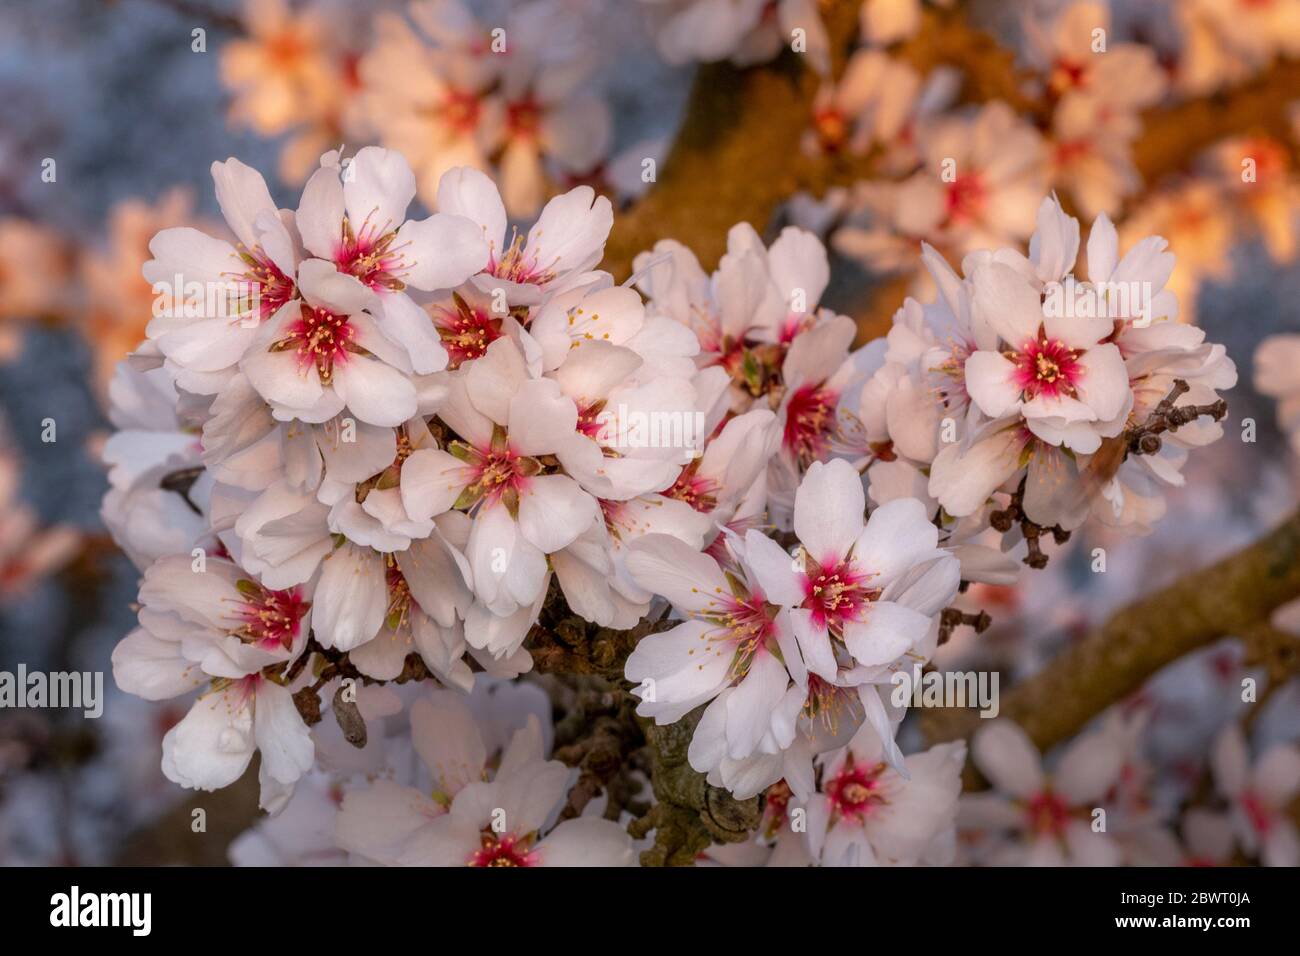 Gorgeous Gathering of Almond Blossoms. Stock Photo